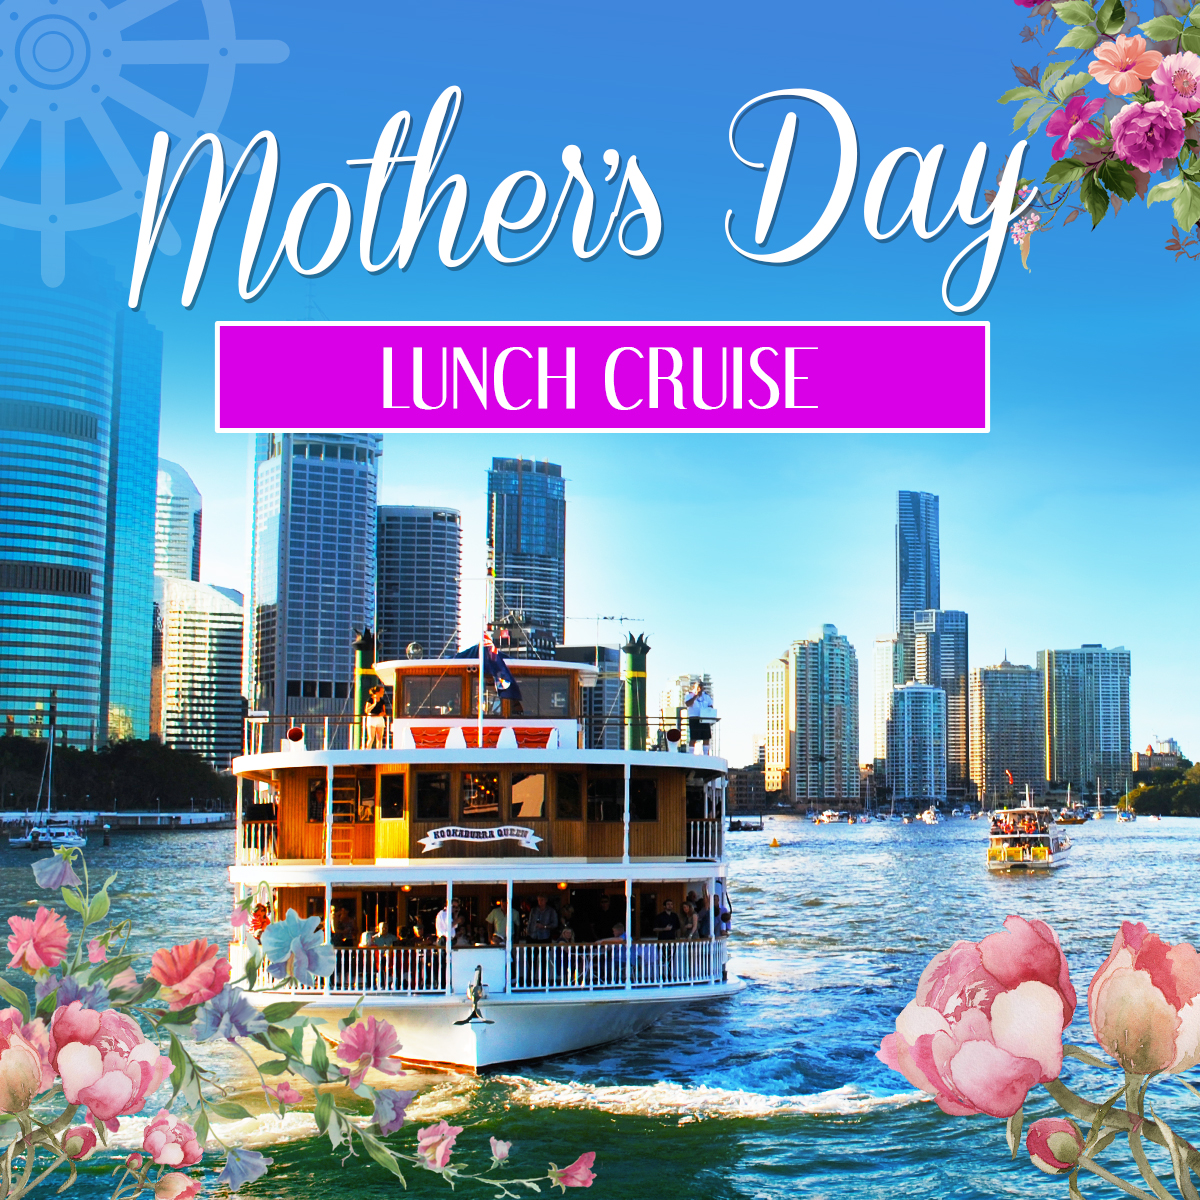 mother's day lunch cruise melbourne